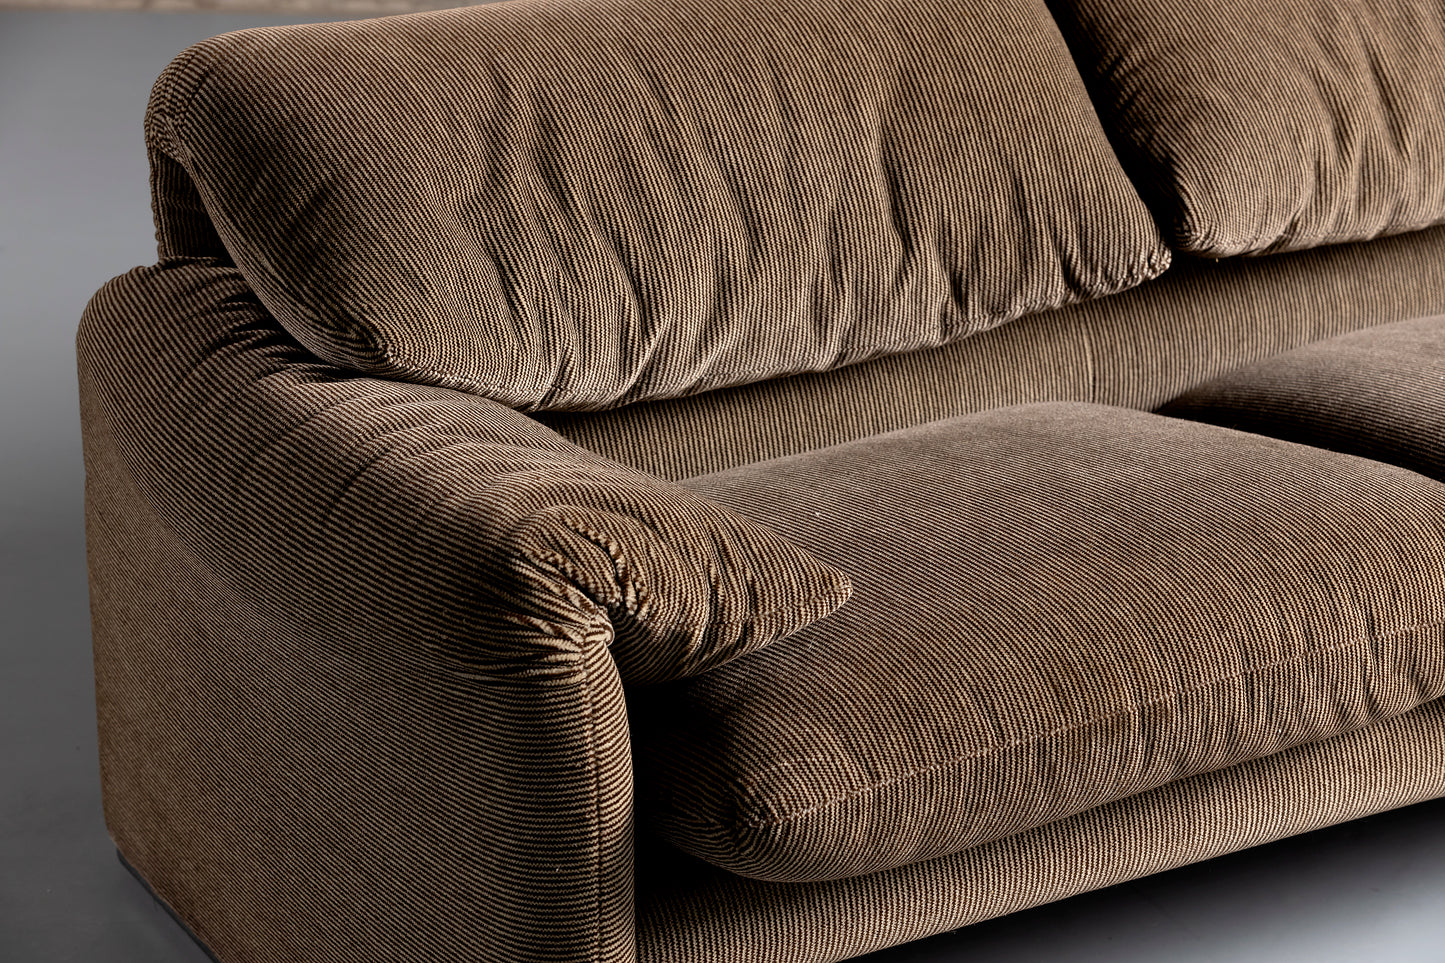 Arm rest of a 2 seater brown sofa